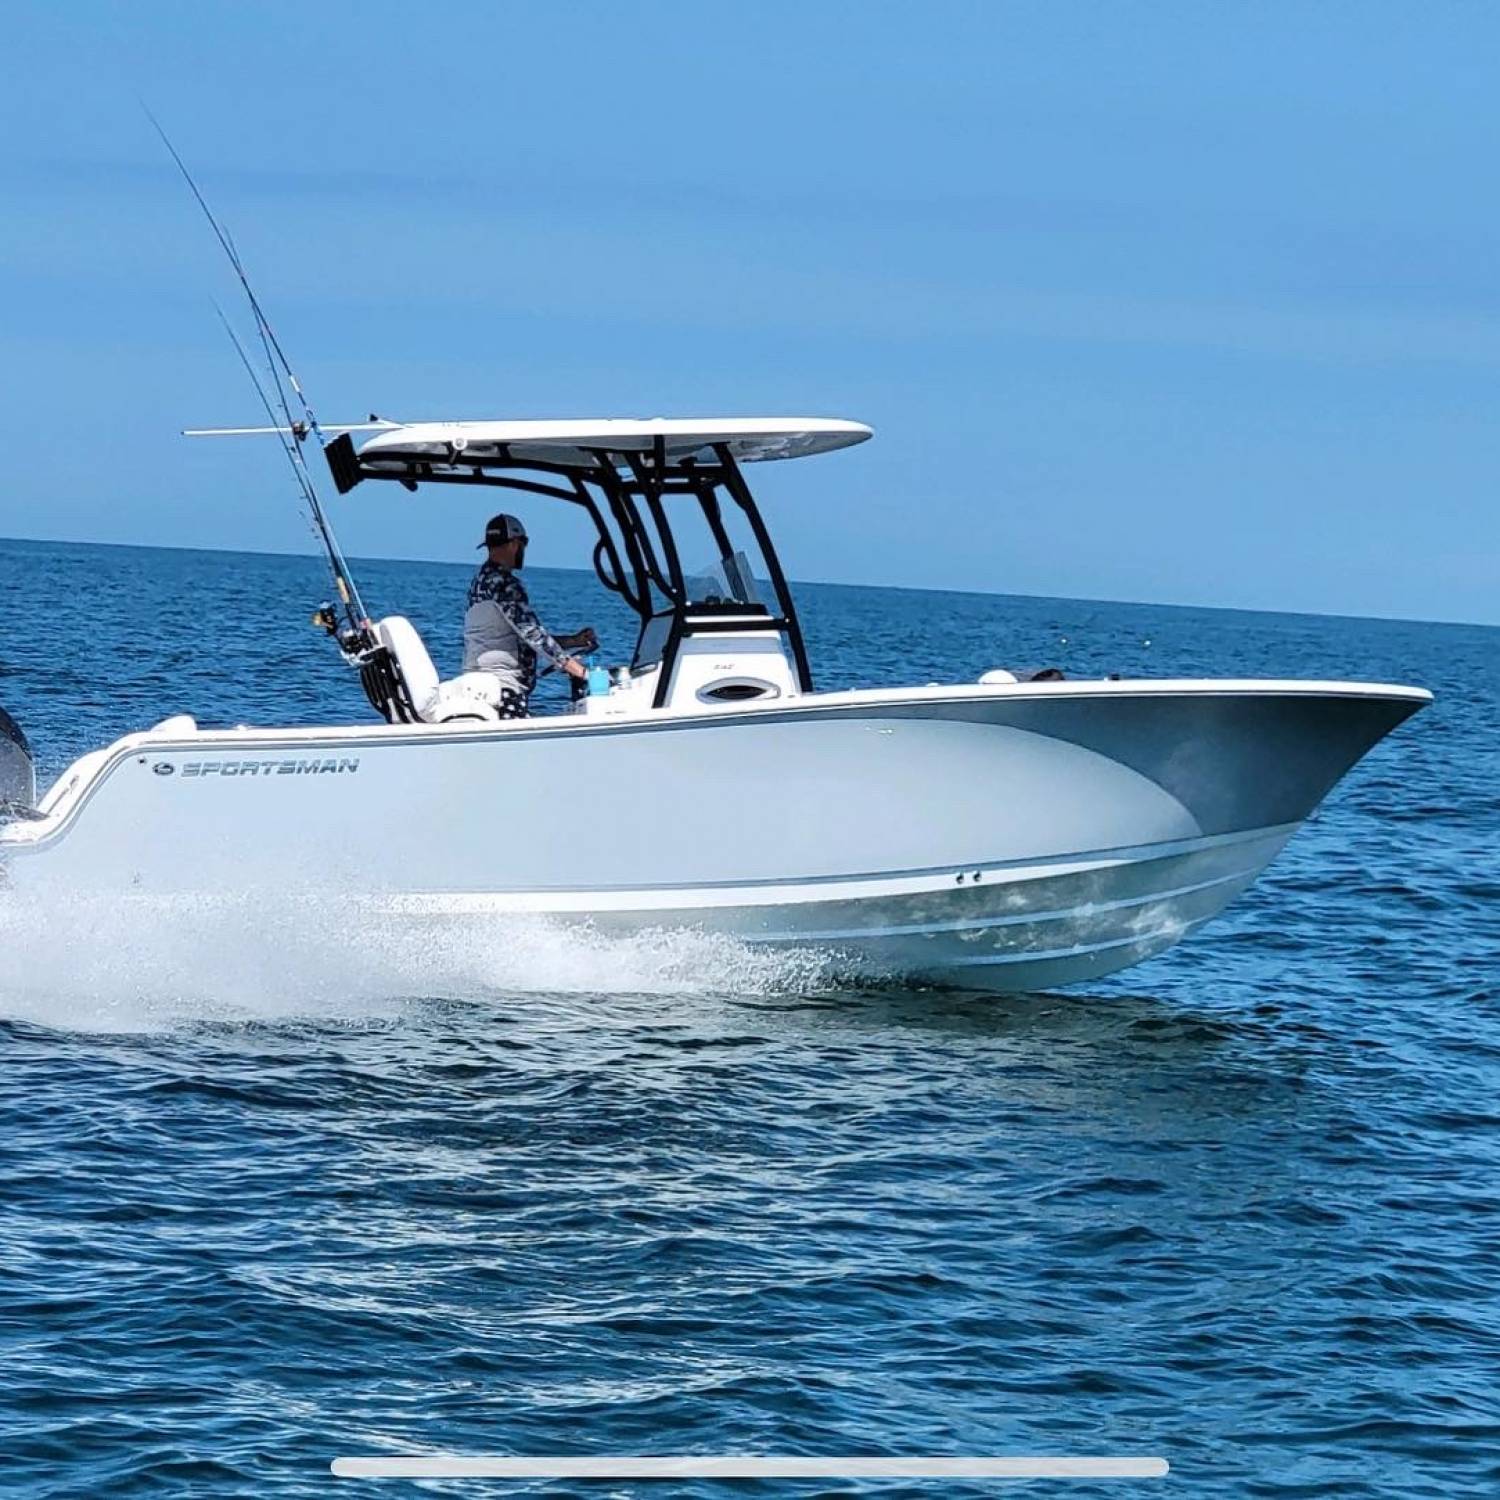 Title: Sportsman 242 open - On board their Sportsman Open 242 Center Console - Location: Clearwater Florida. Participating in the Photo Contest #SportsmanMarch